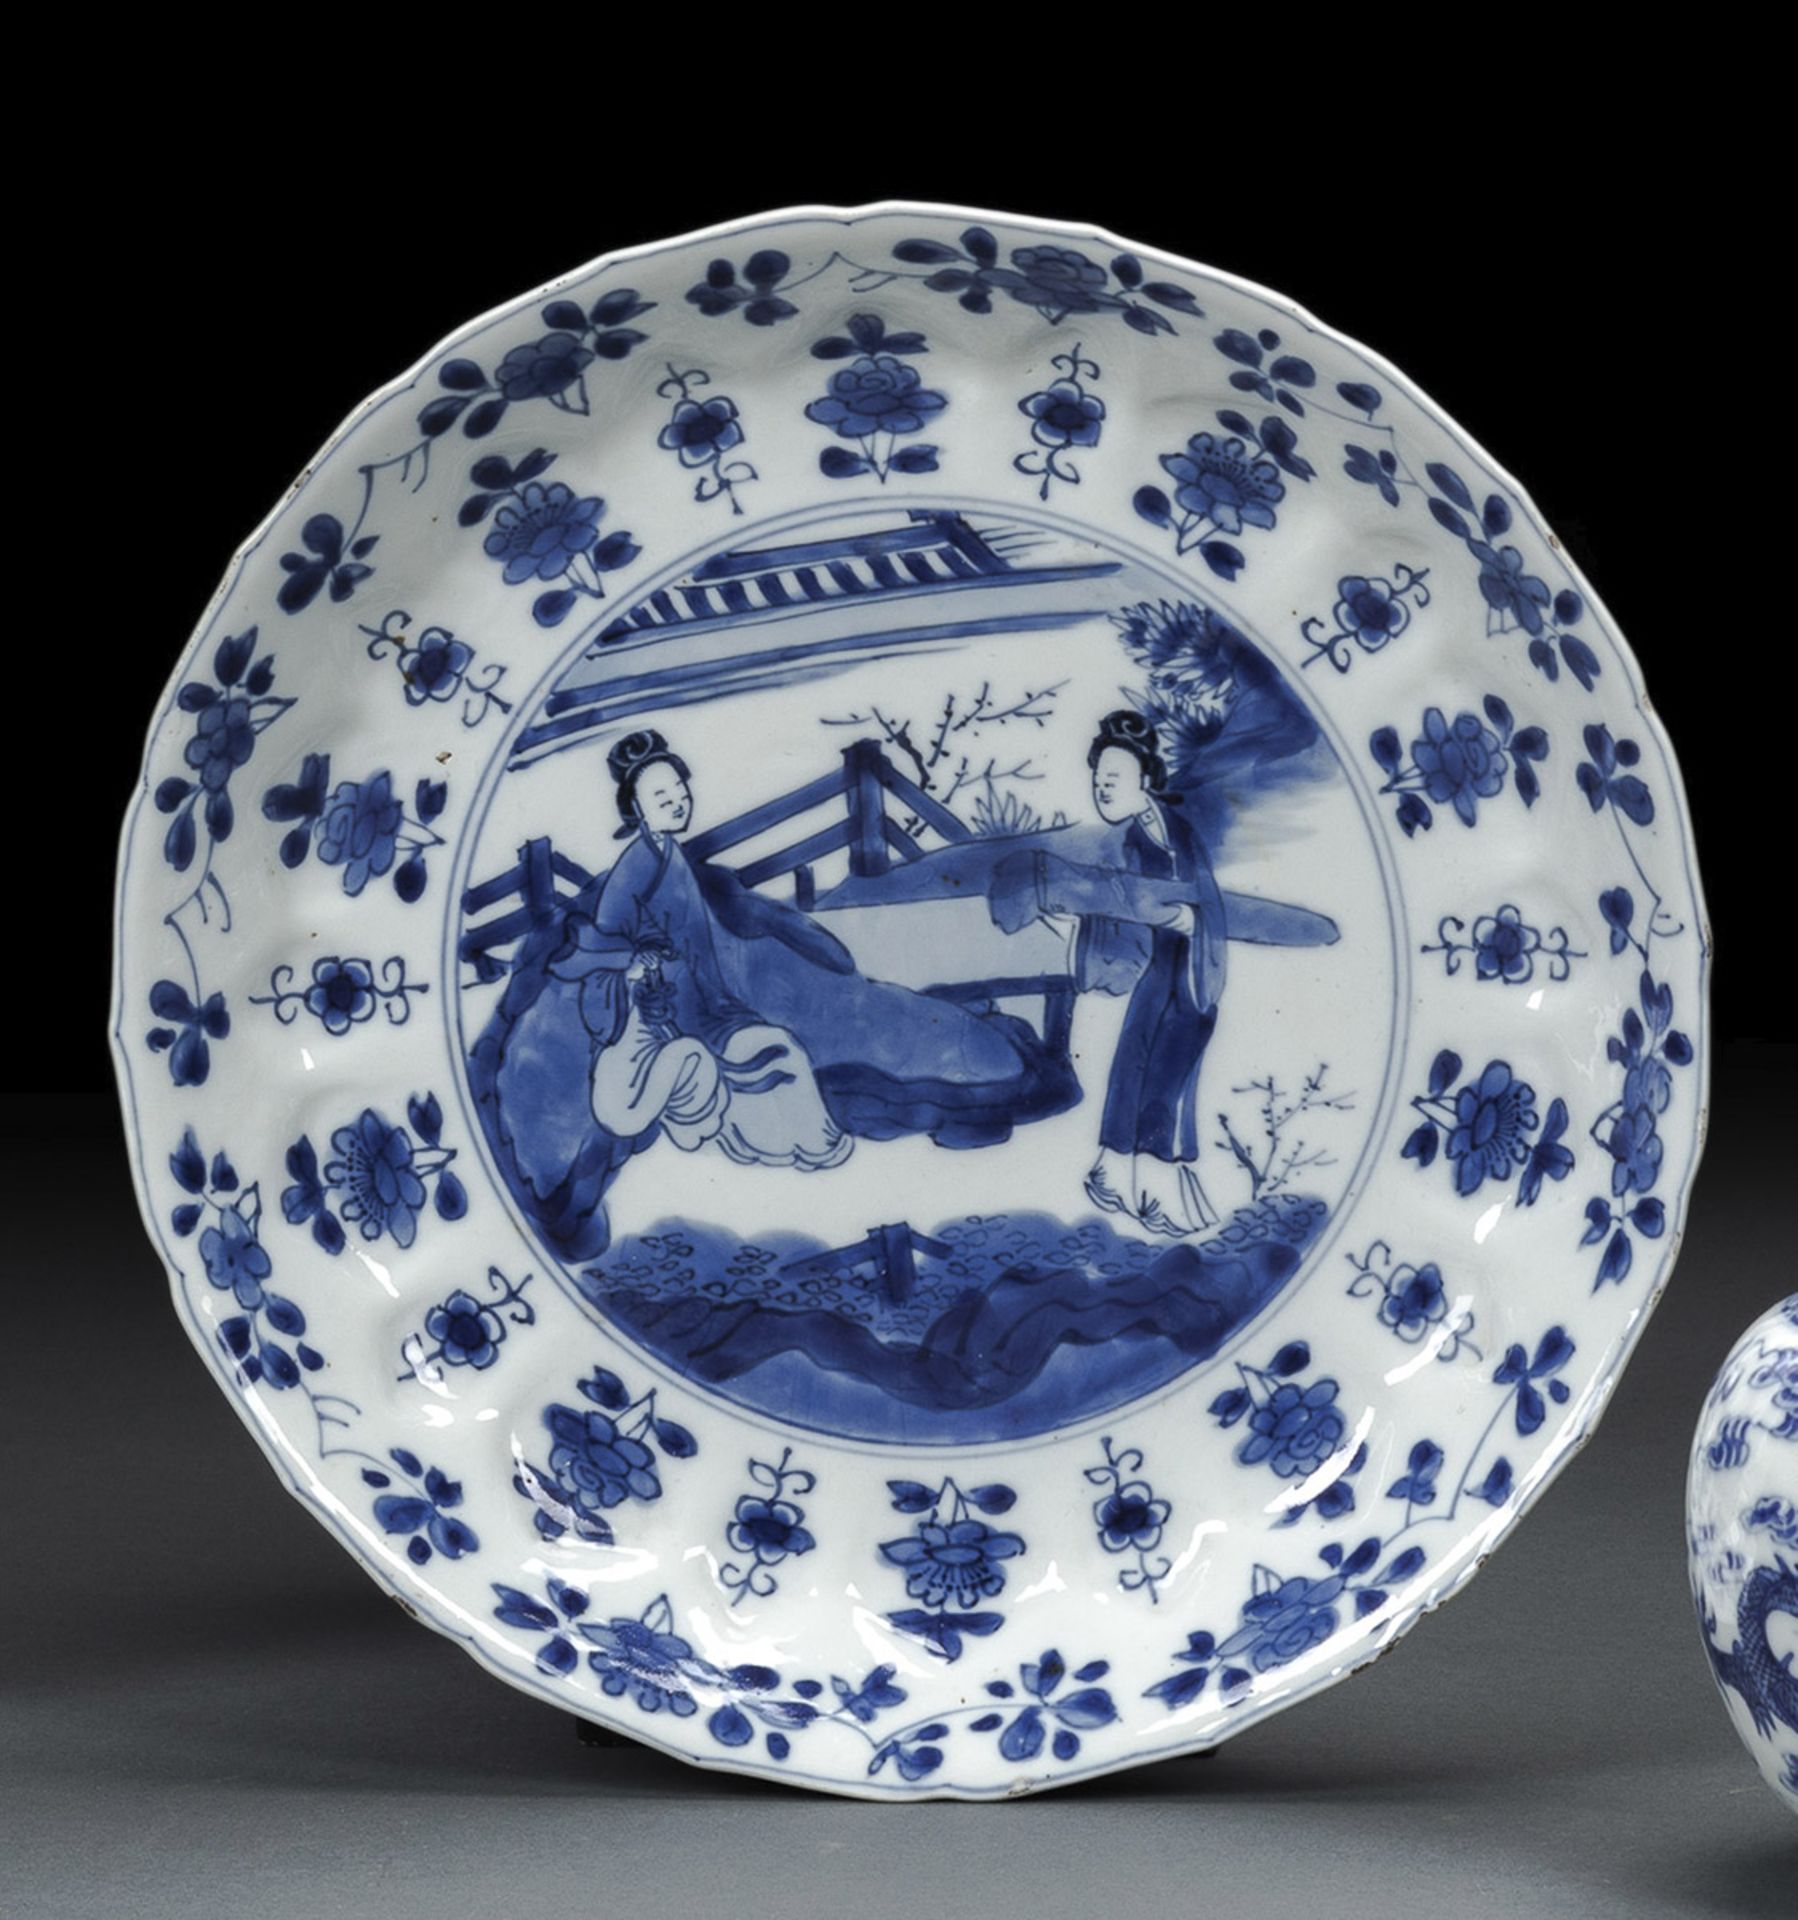 A BLUE AND WHITE BLOSSOM-SHAPED PORCELAIN DISH